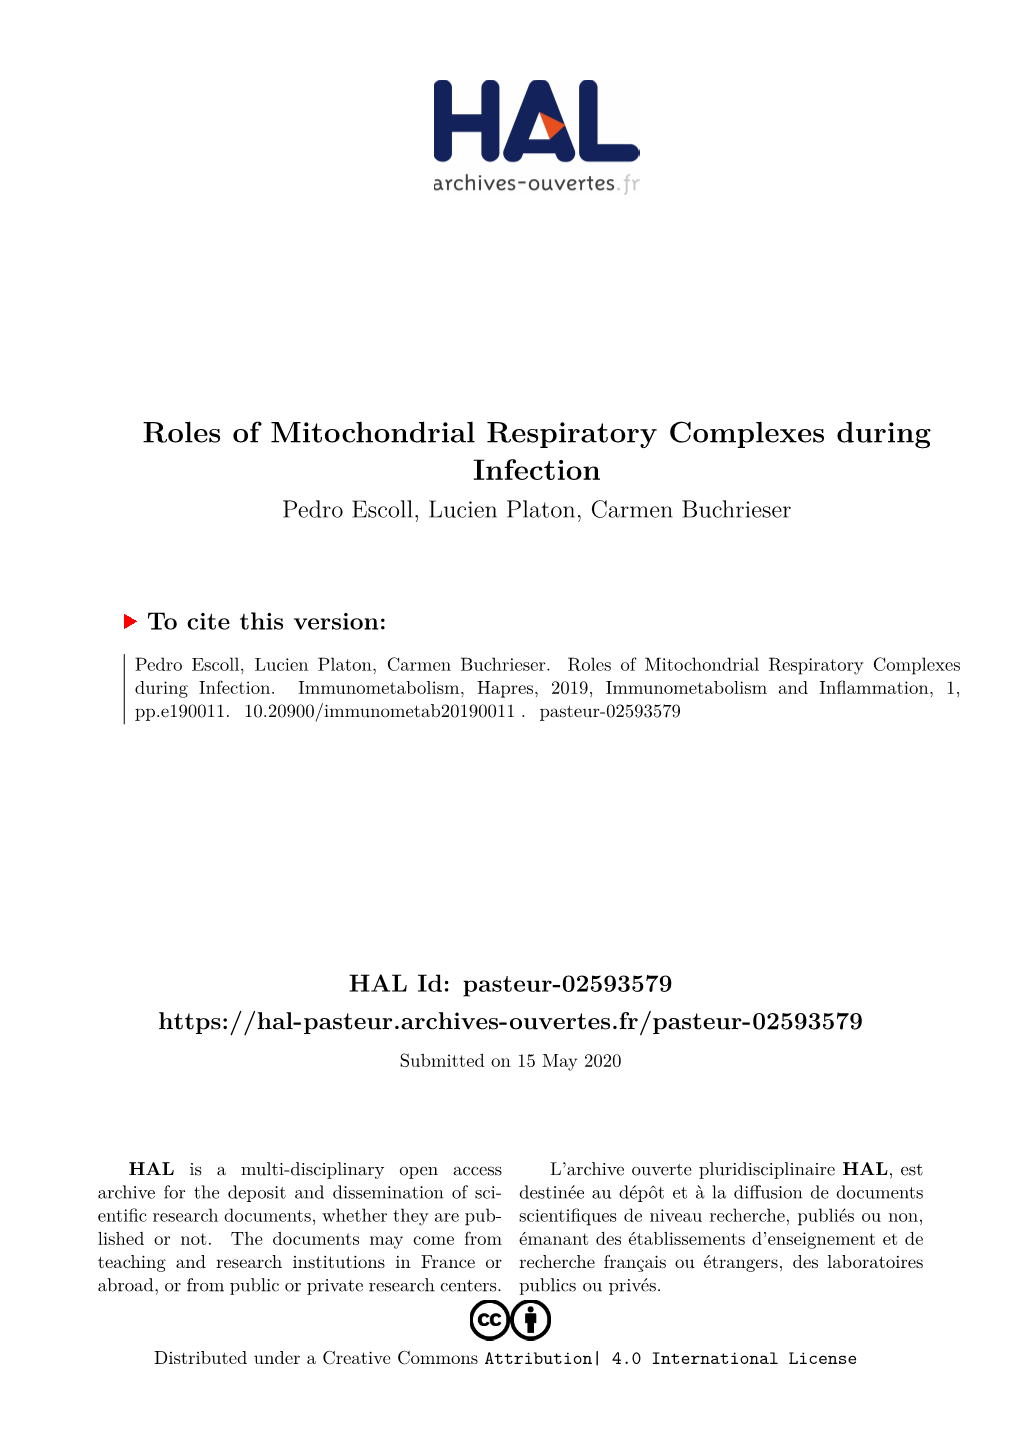 Roles of Mitochondrial Respiratory Complexes During Infection Pedro Escoll, Lucien Platon, Carmen Buchrieser